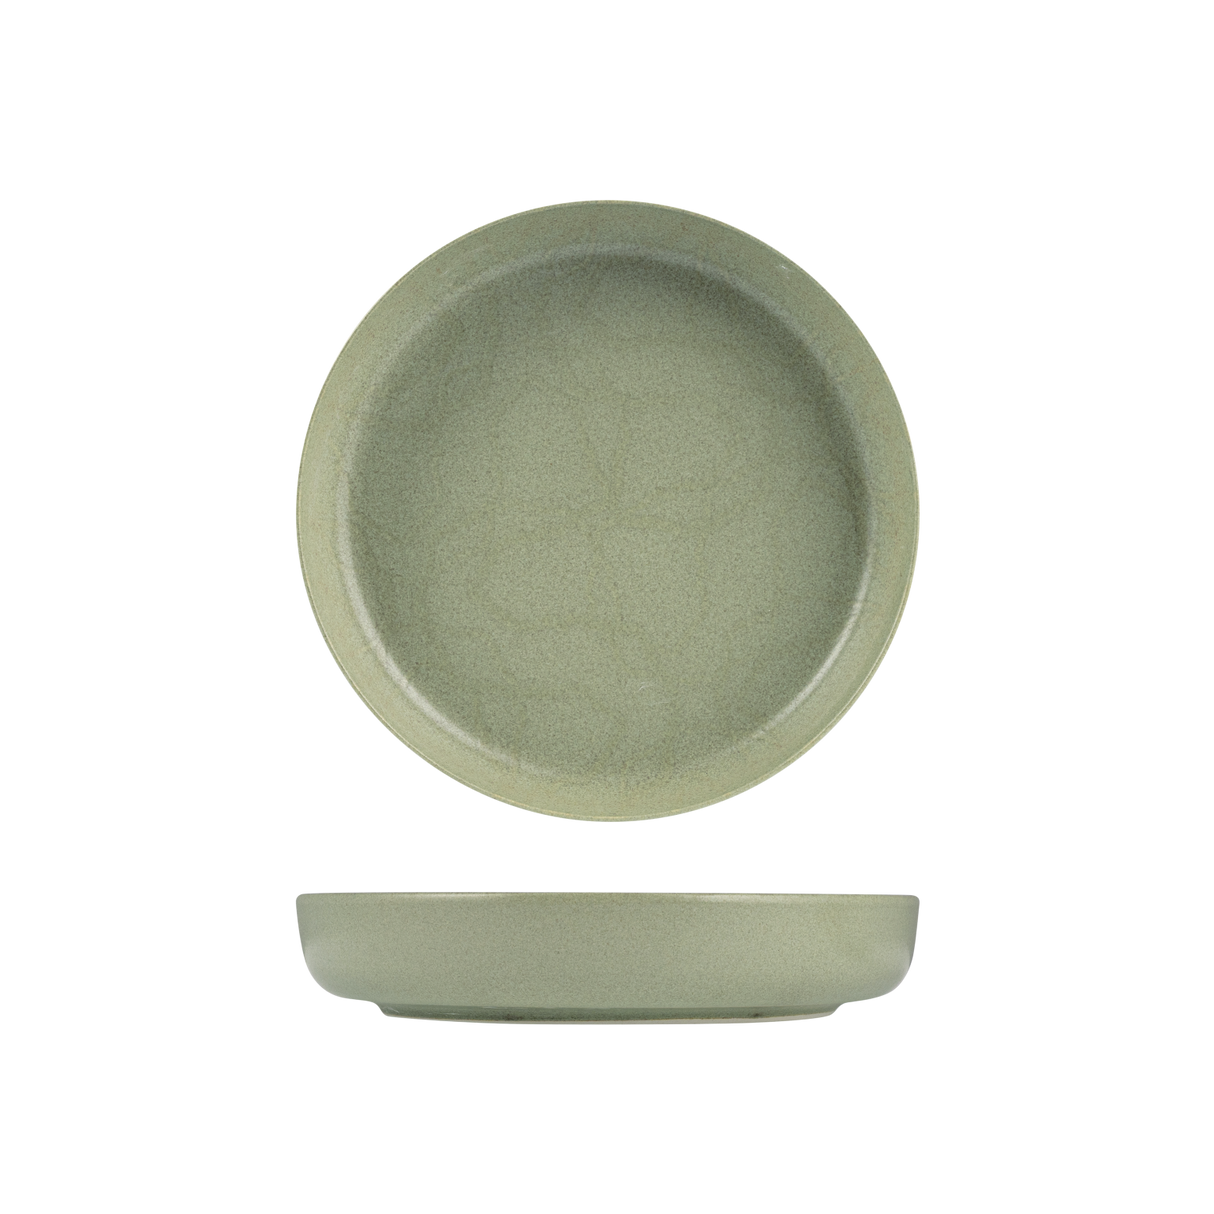 Share Bowl 240mm  45mm H NMC Maze Kale - Pack Of 6